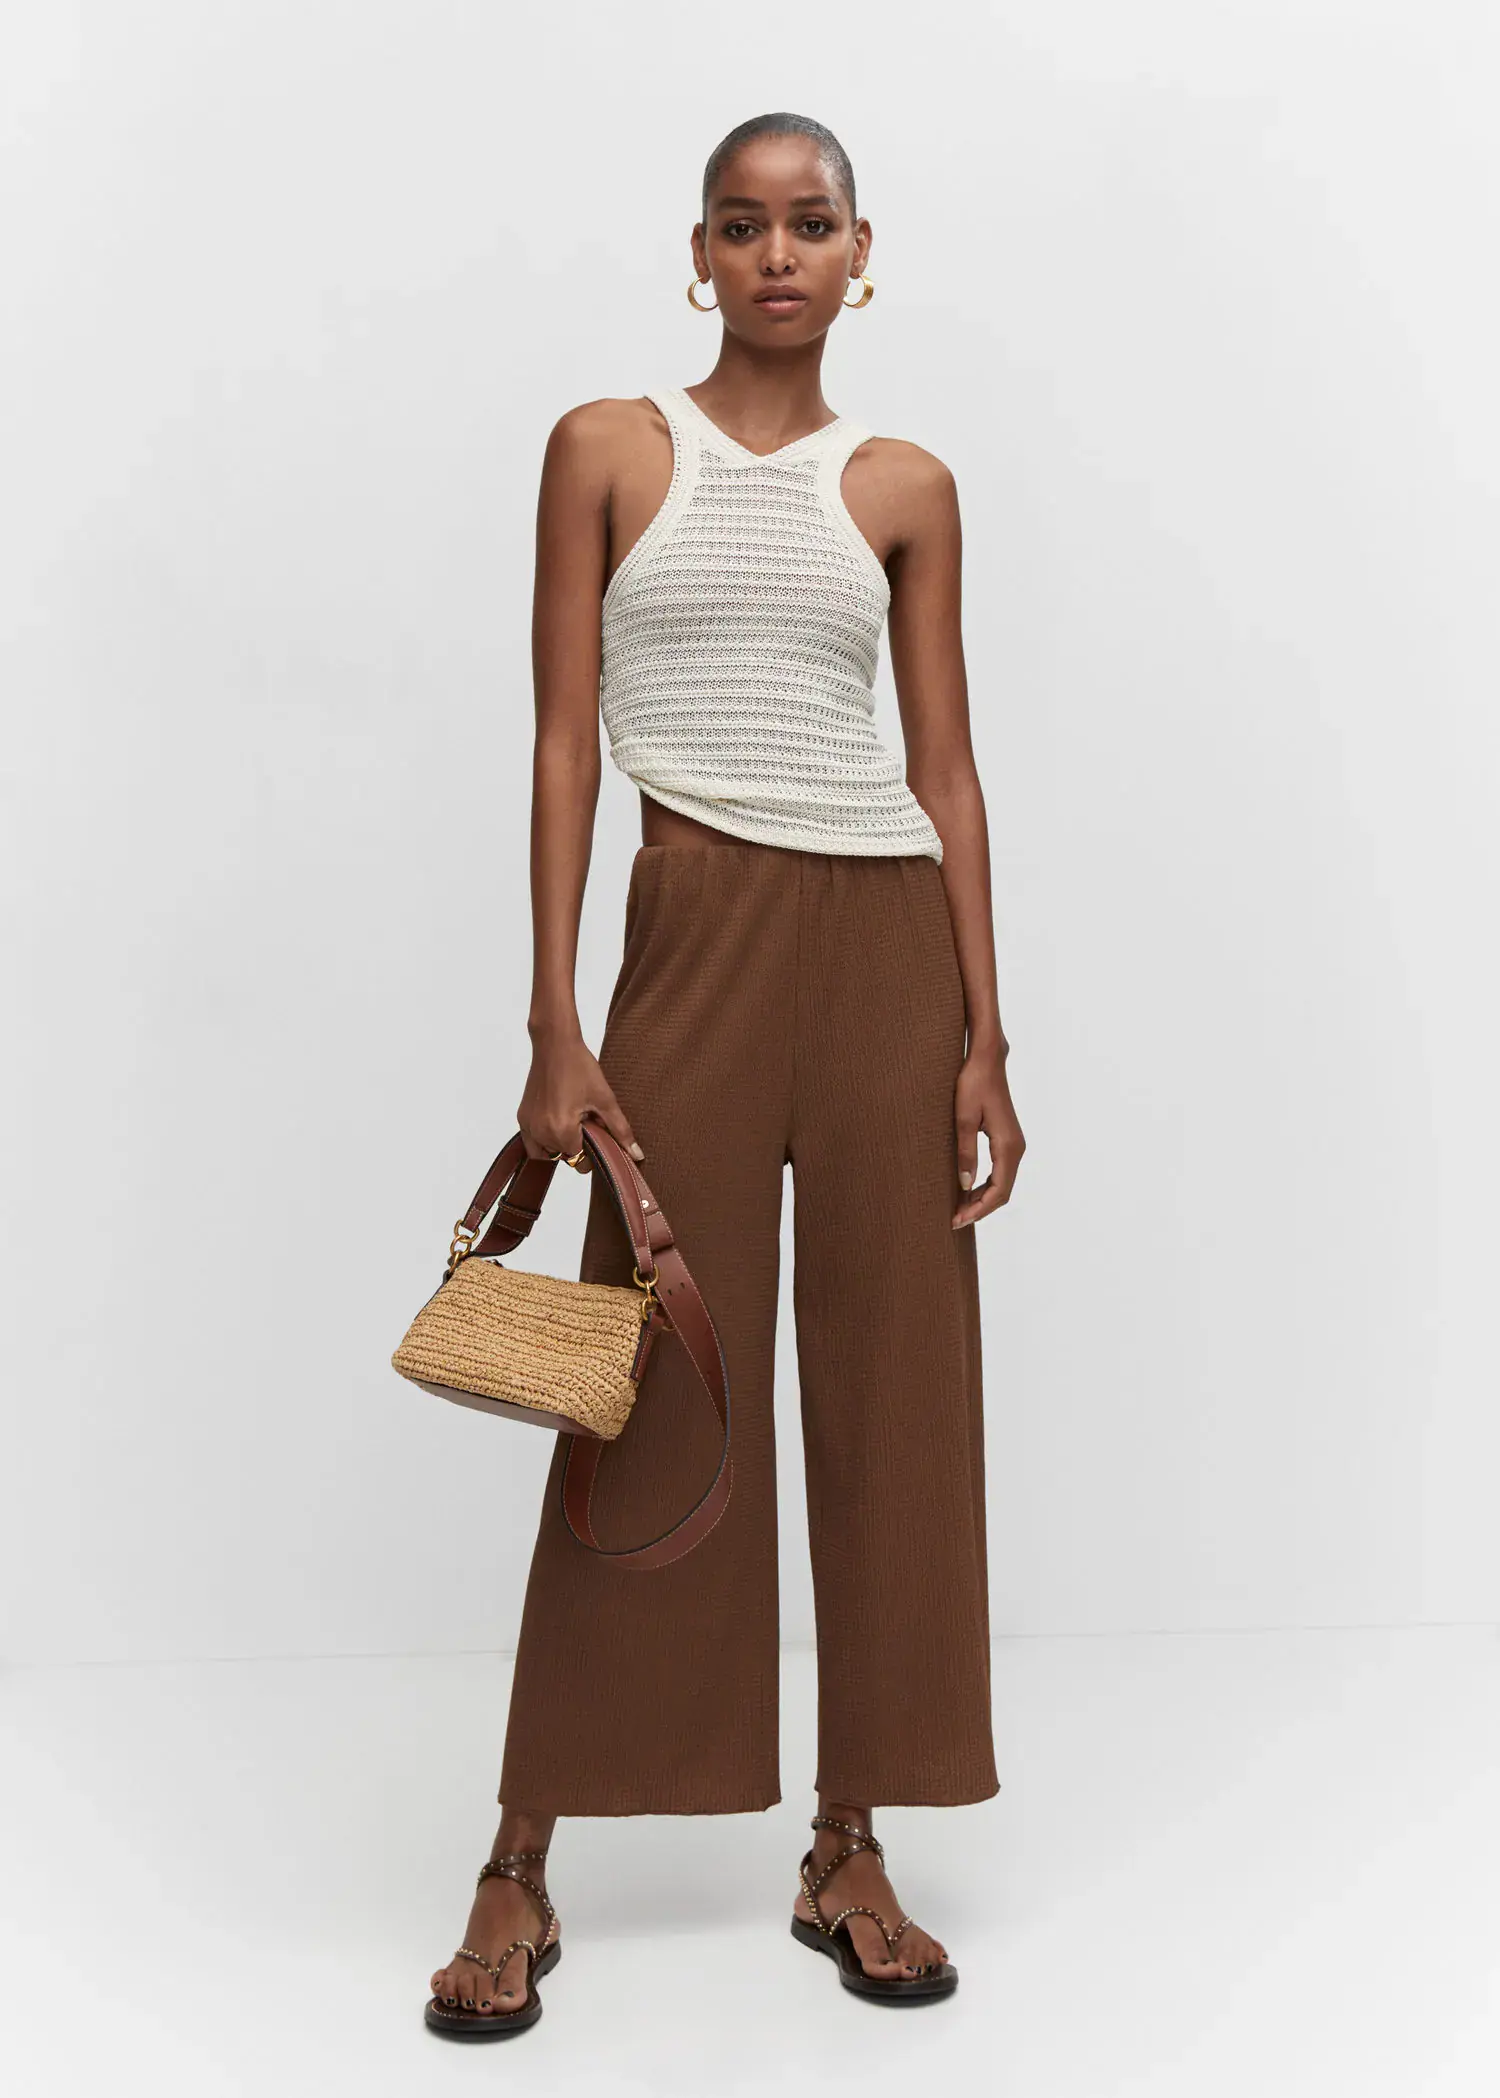 Mango Textured culotte trousers. a woman holding a straw bag while standing in a room. 